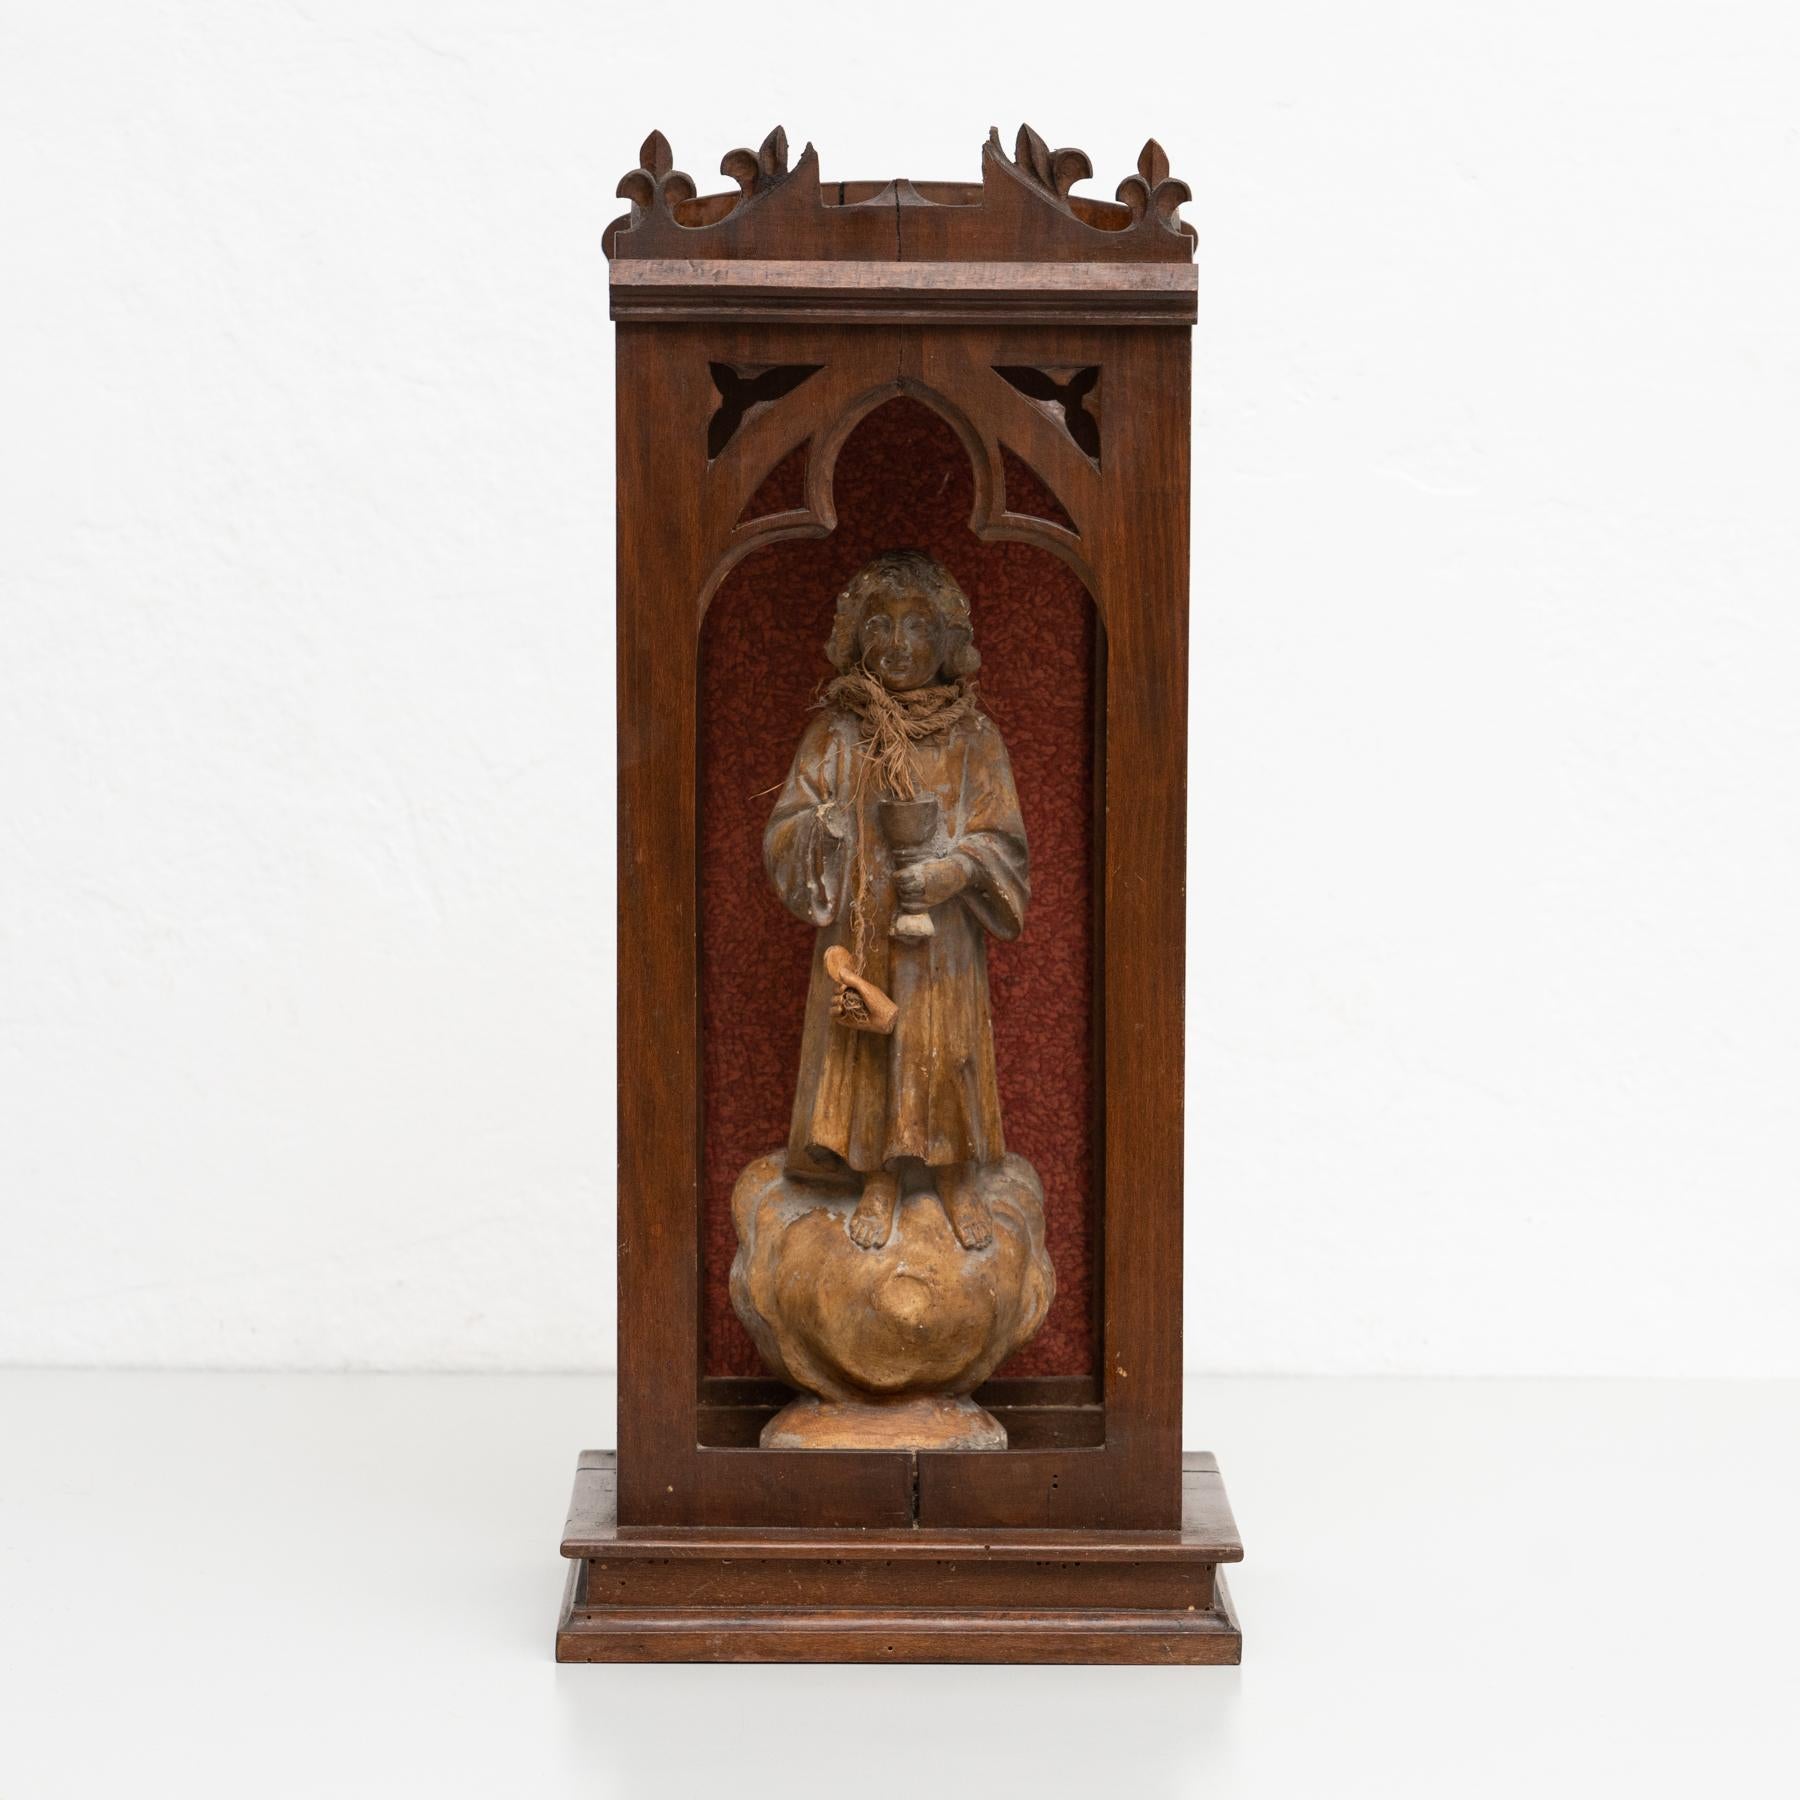 Traditional religious signed plaster figure of a virgin in a wooden niche.

Made in traditional Catalan atelier in Olot, Spain, circa 1950.

In original condition, with minor wear consistent with age and use, preserving a beautiful